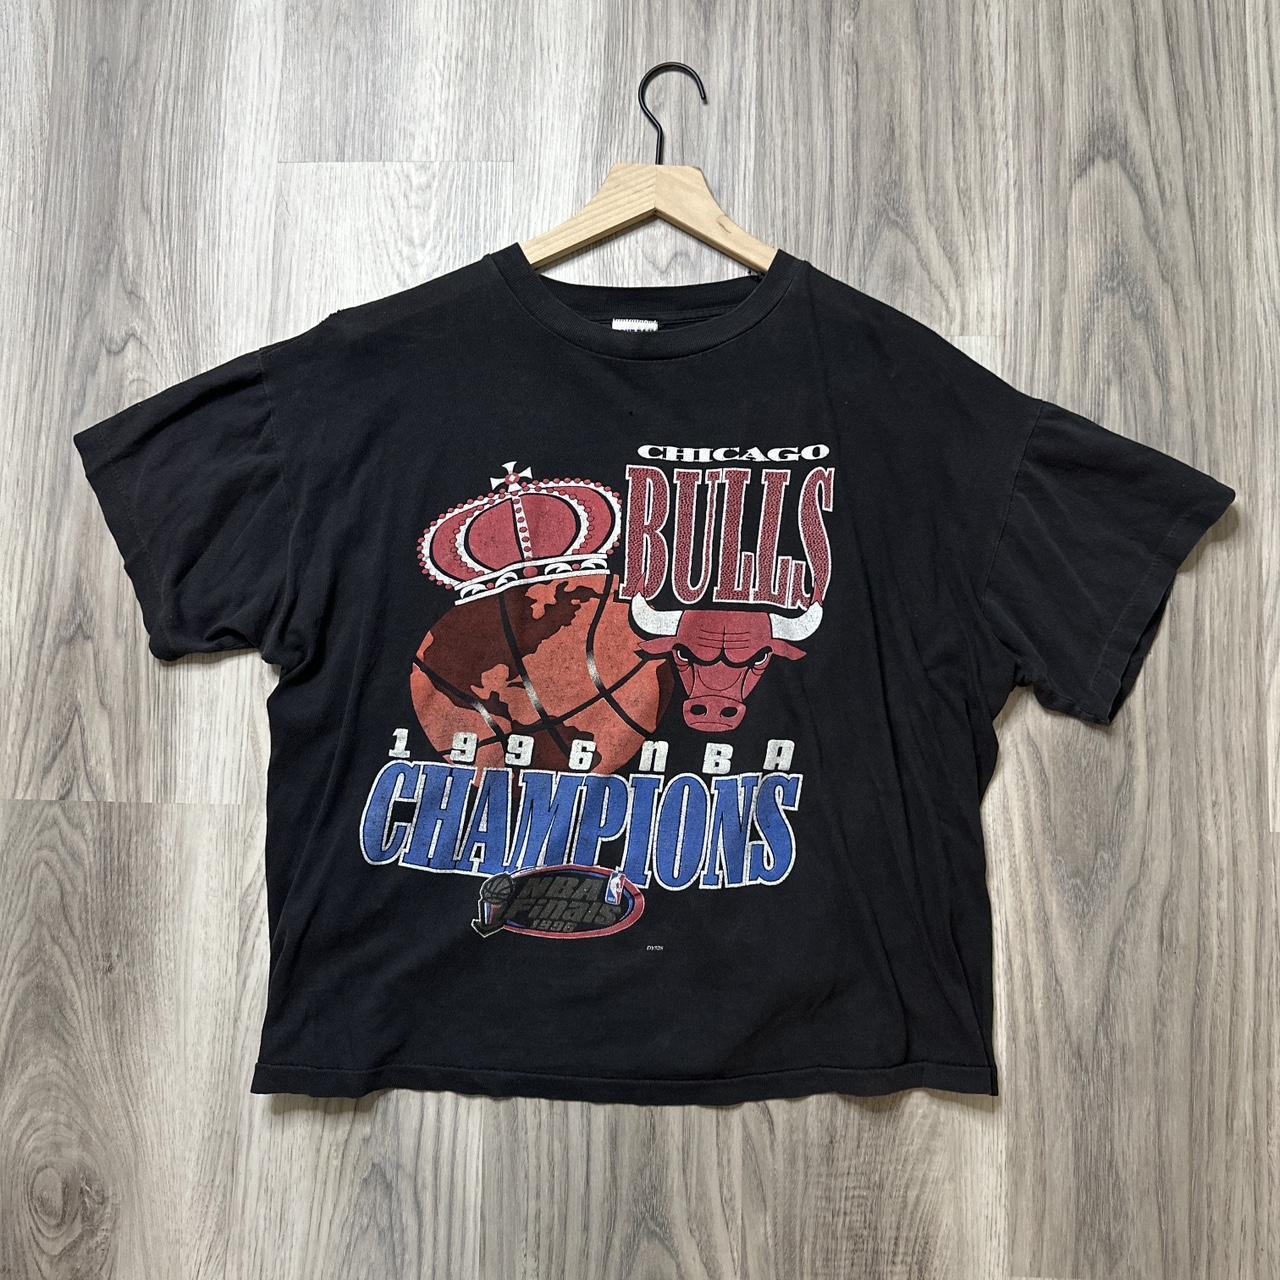 Vintage 1996 Chicago Bulls Shirt. The shirt is in - Depop